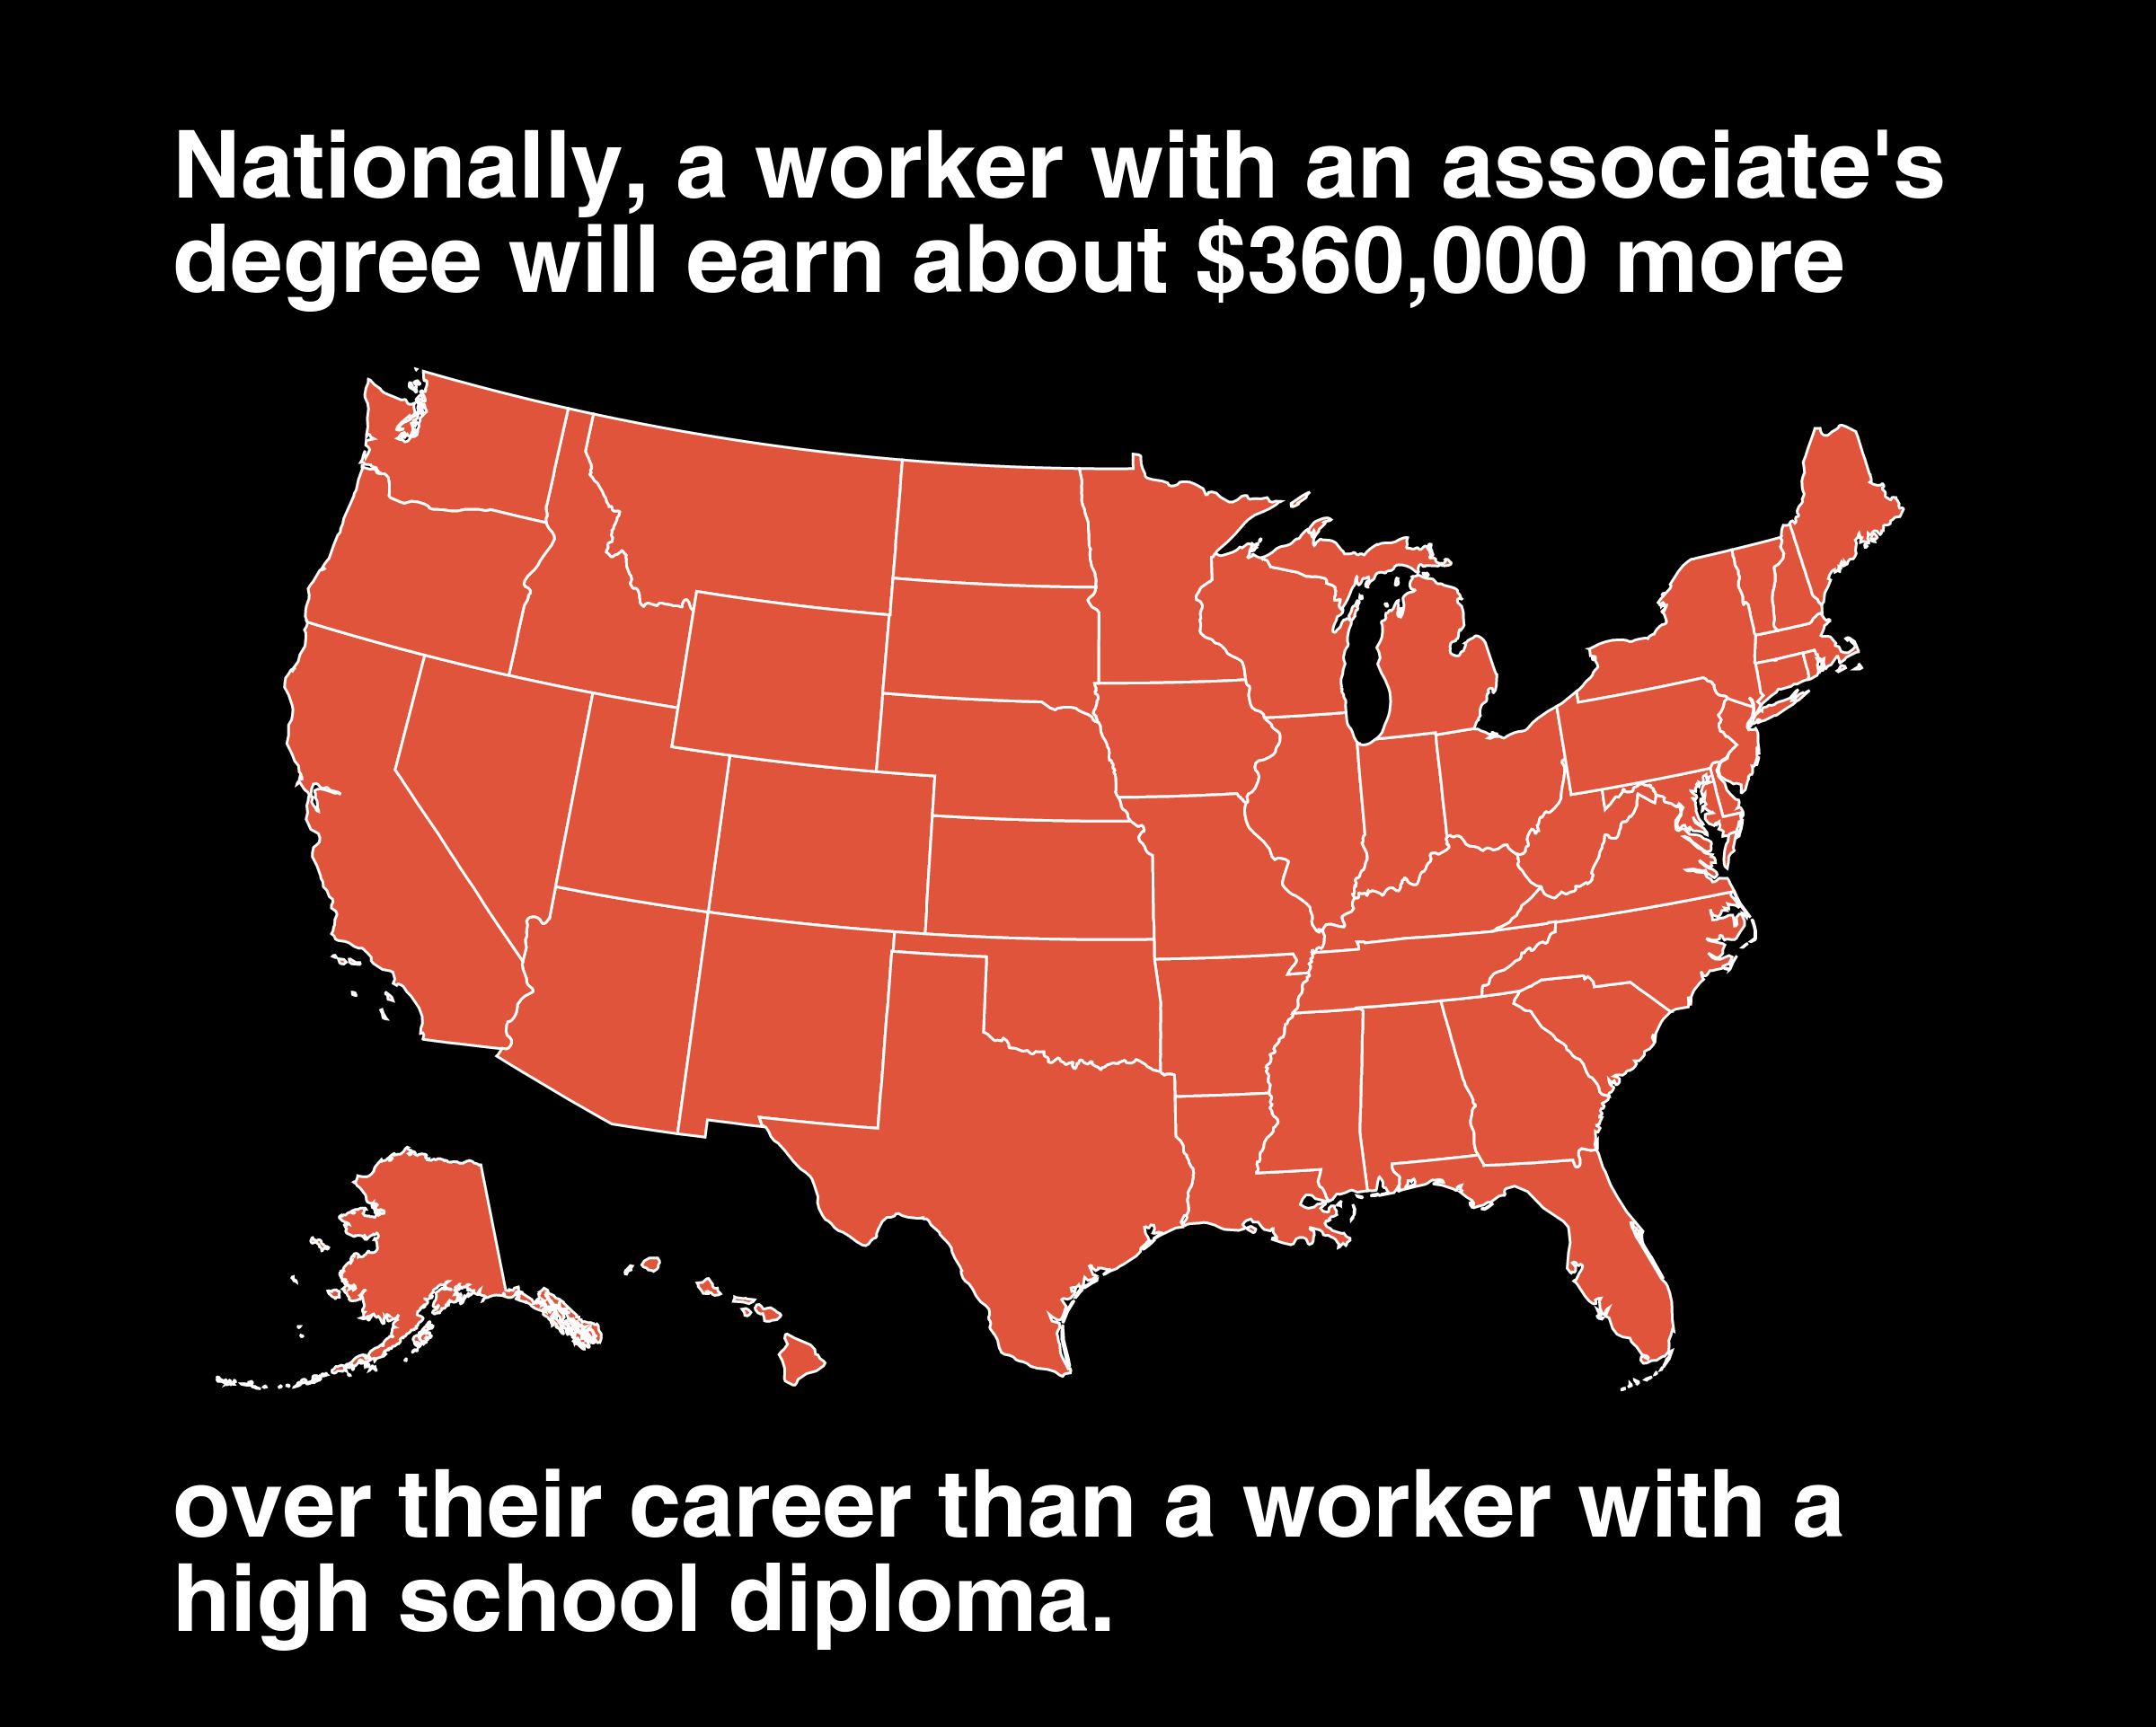 Infographic by Aaron Barksdale, Source: New Hampshire Department of Education